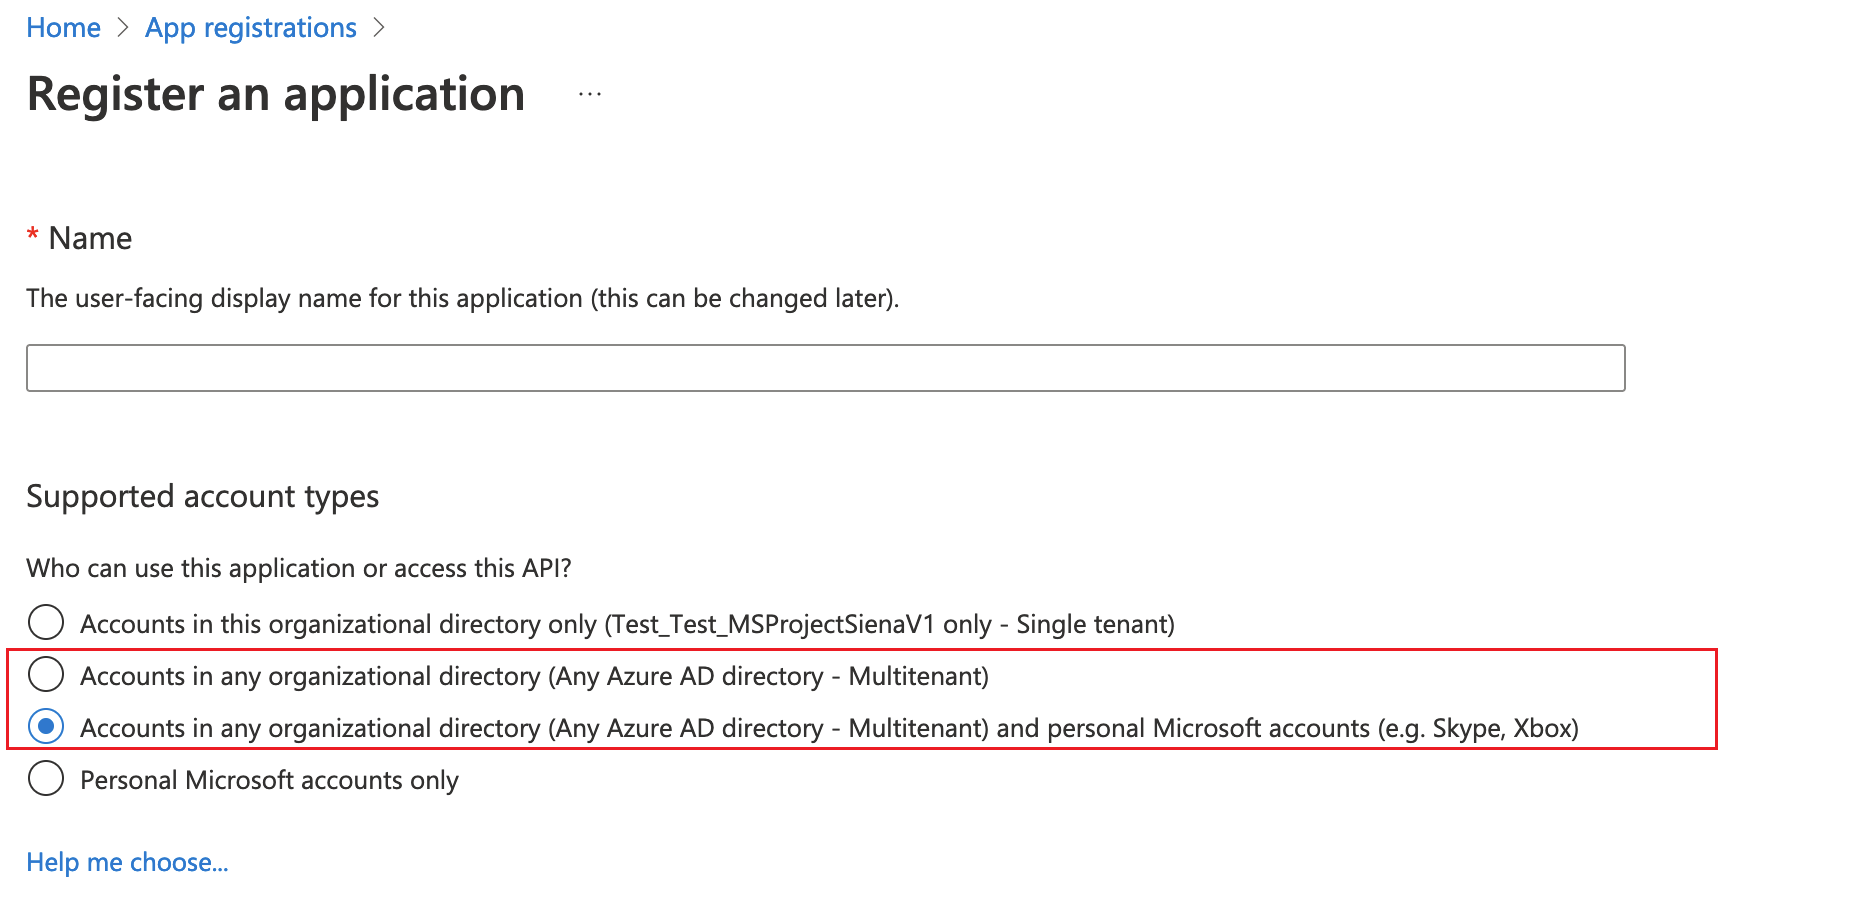 App registration - supported account types for wrap.